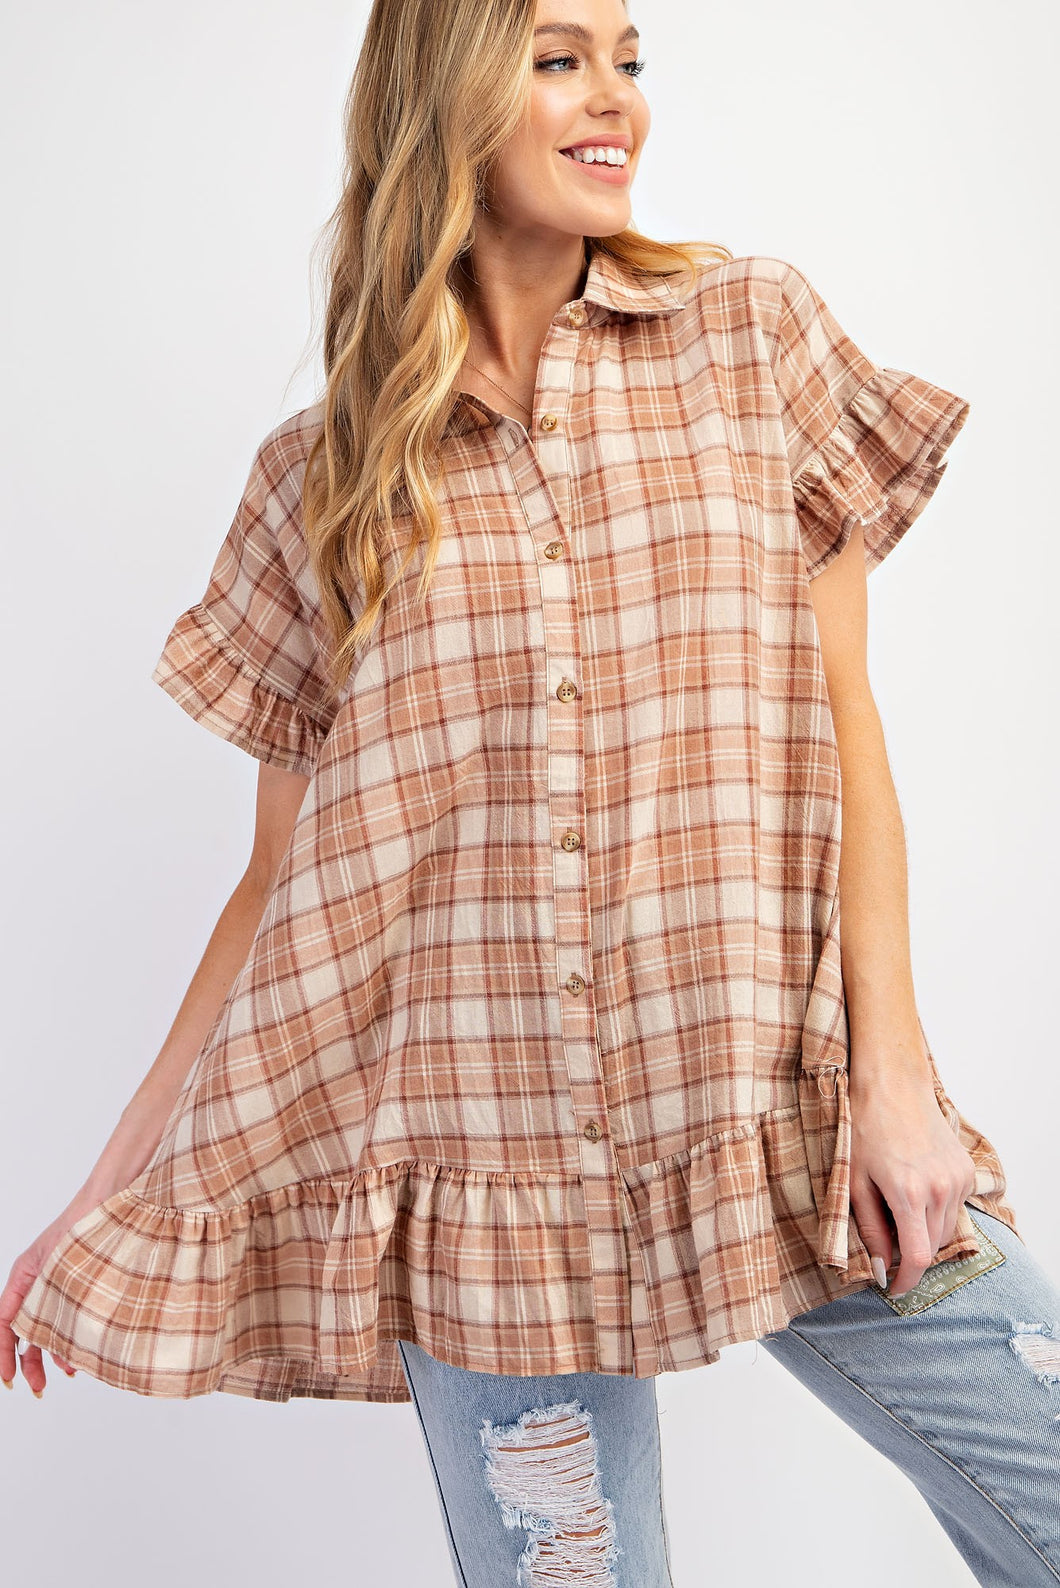 Easel Plaid Button Down Tunic Top in Wooden Shirts & Tops Easel   